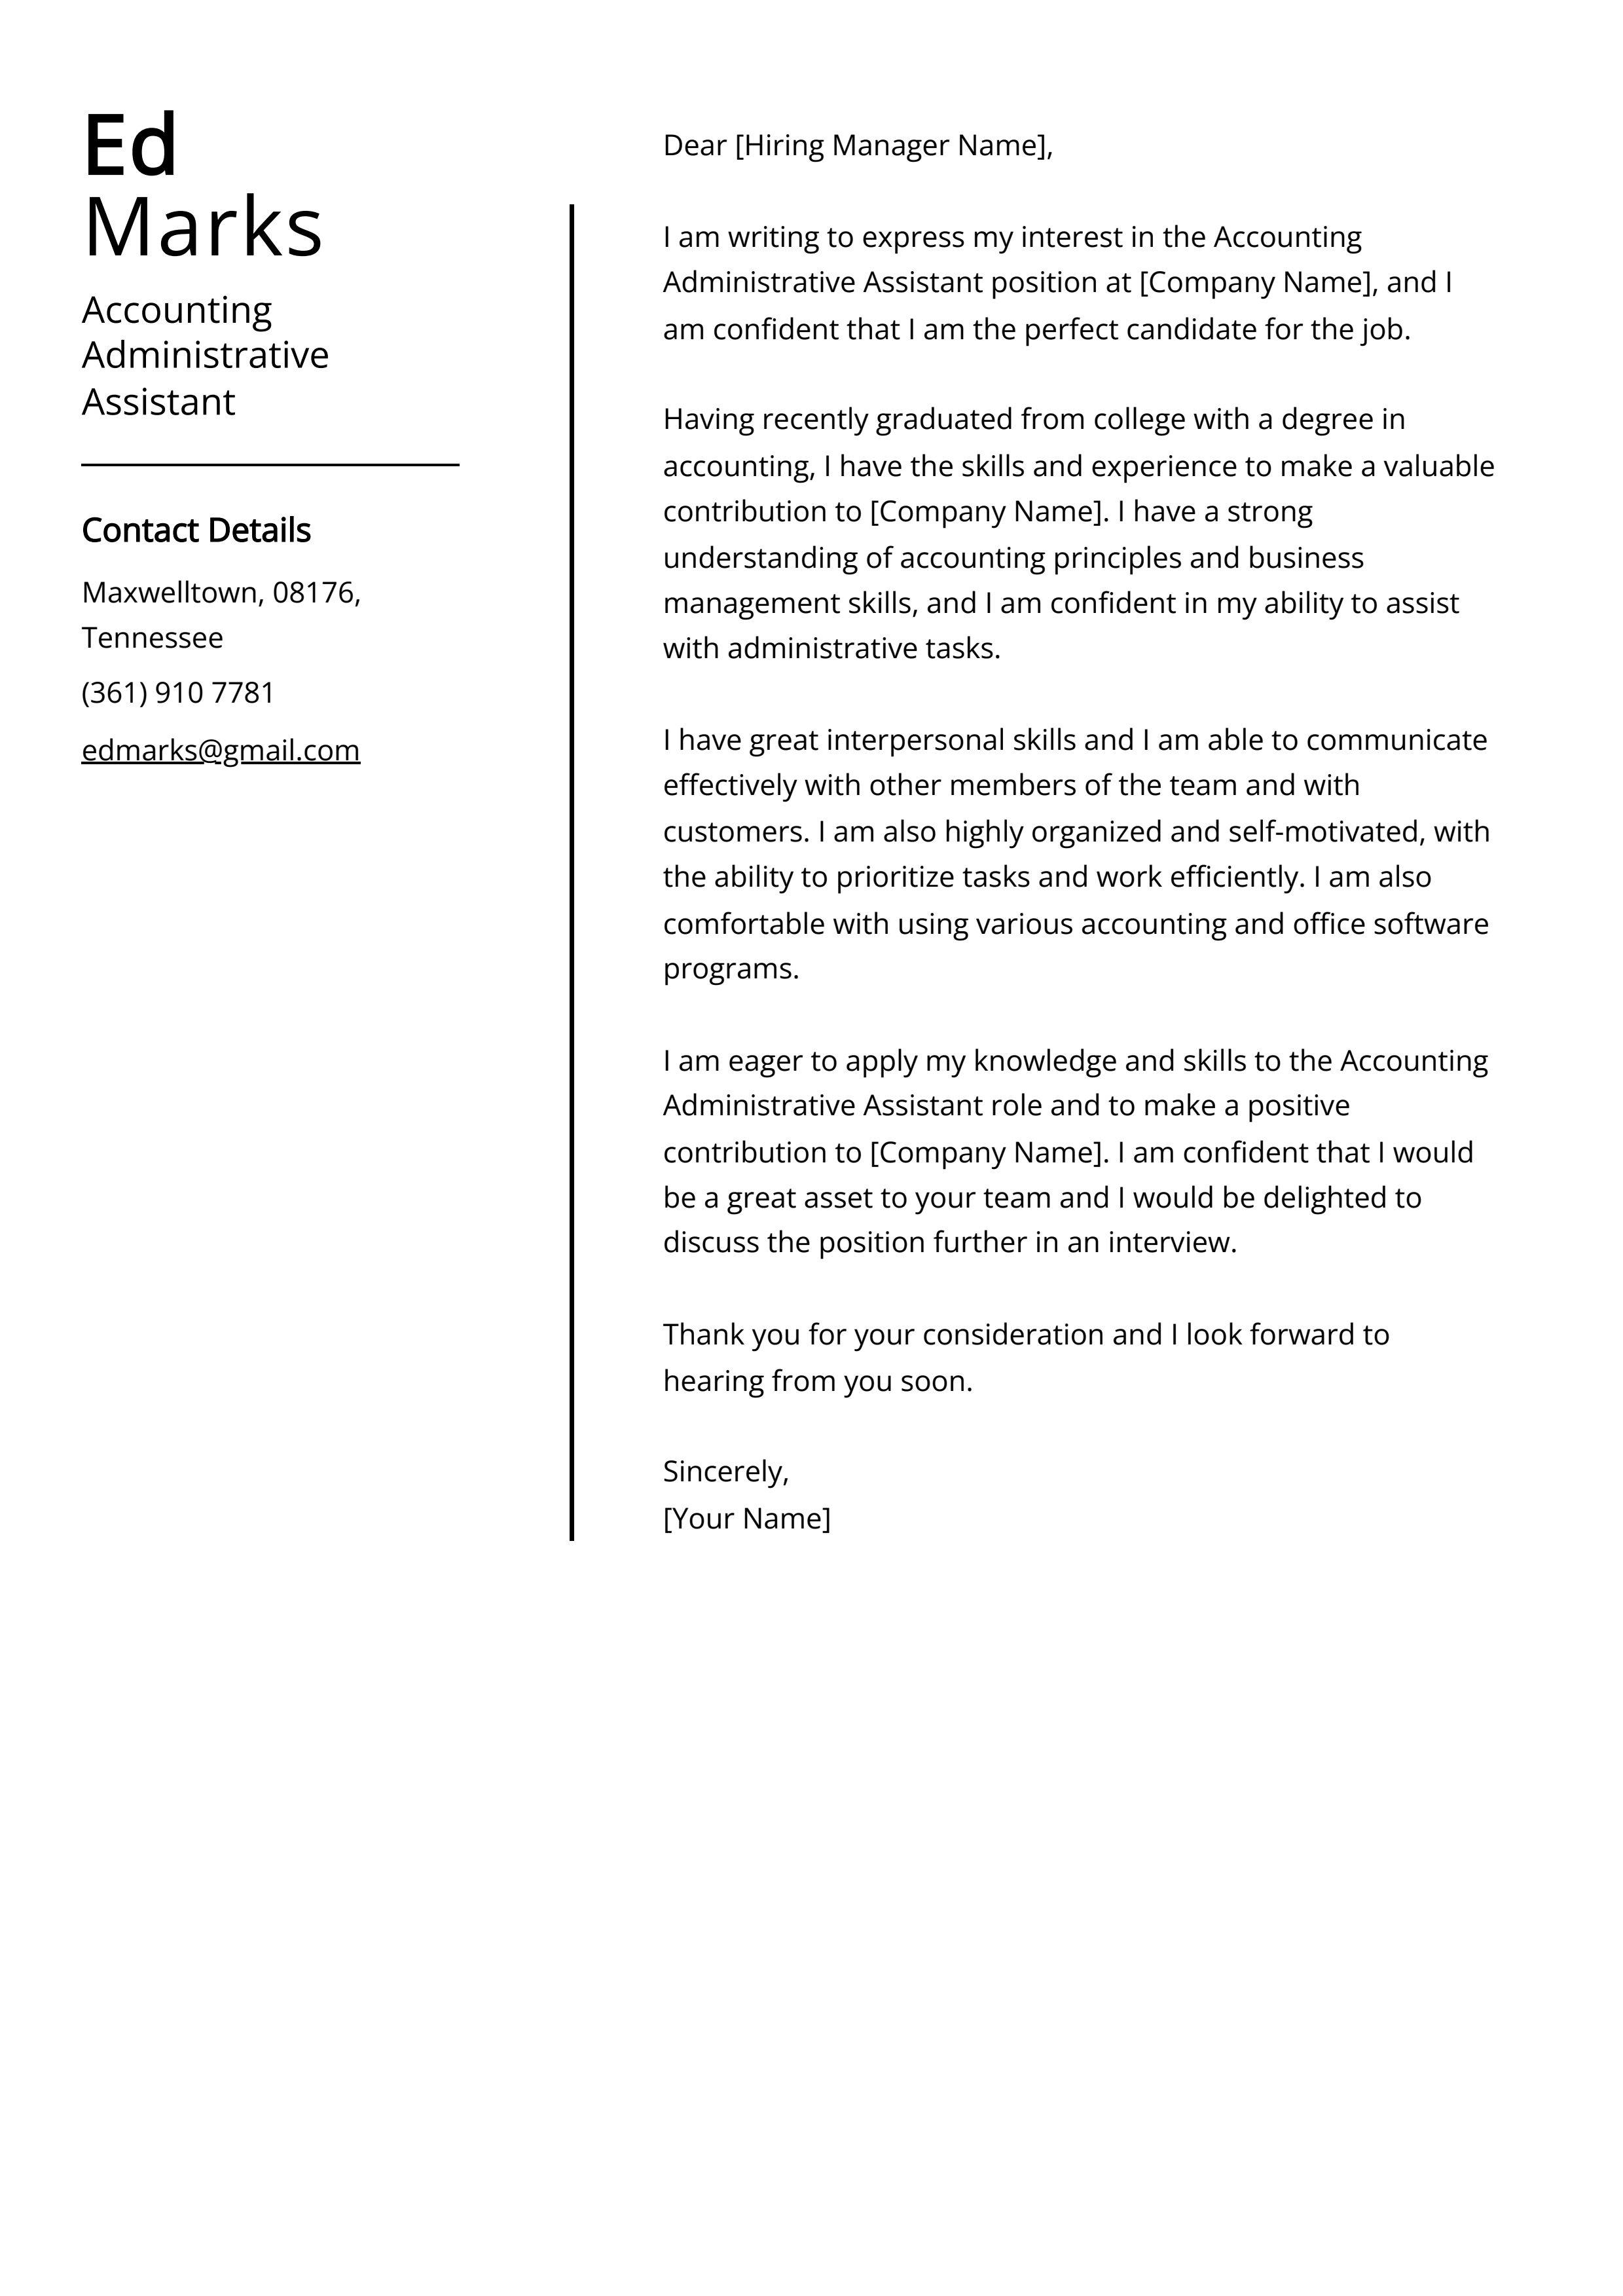 Accounting Administrative Assistant Cover Letter Example